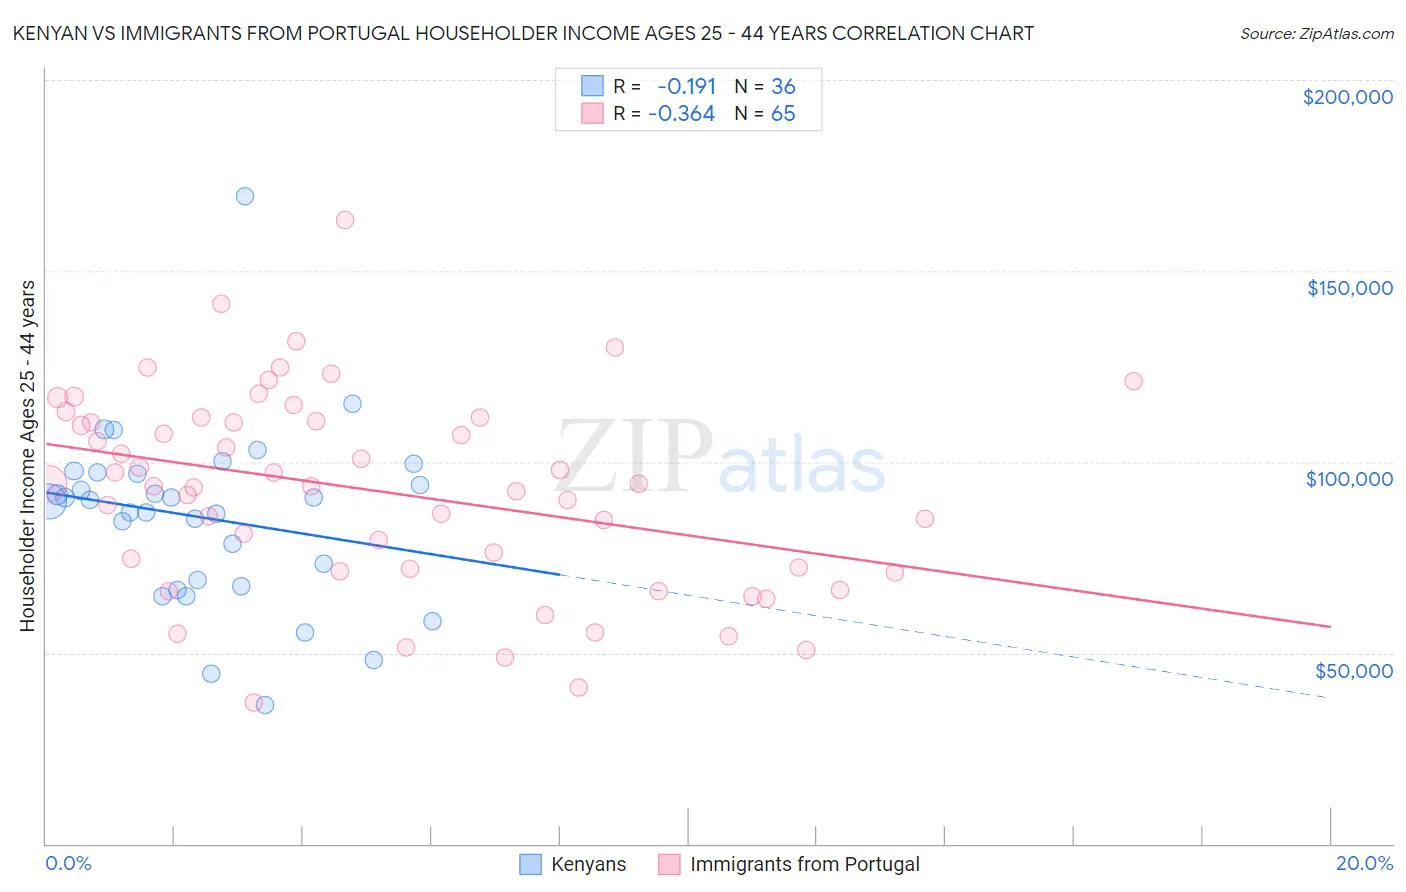 Kenyan vs Immigrants from Portugal Householder Income Ages 25 - 44 years